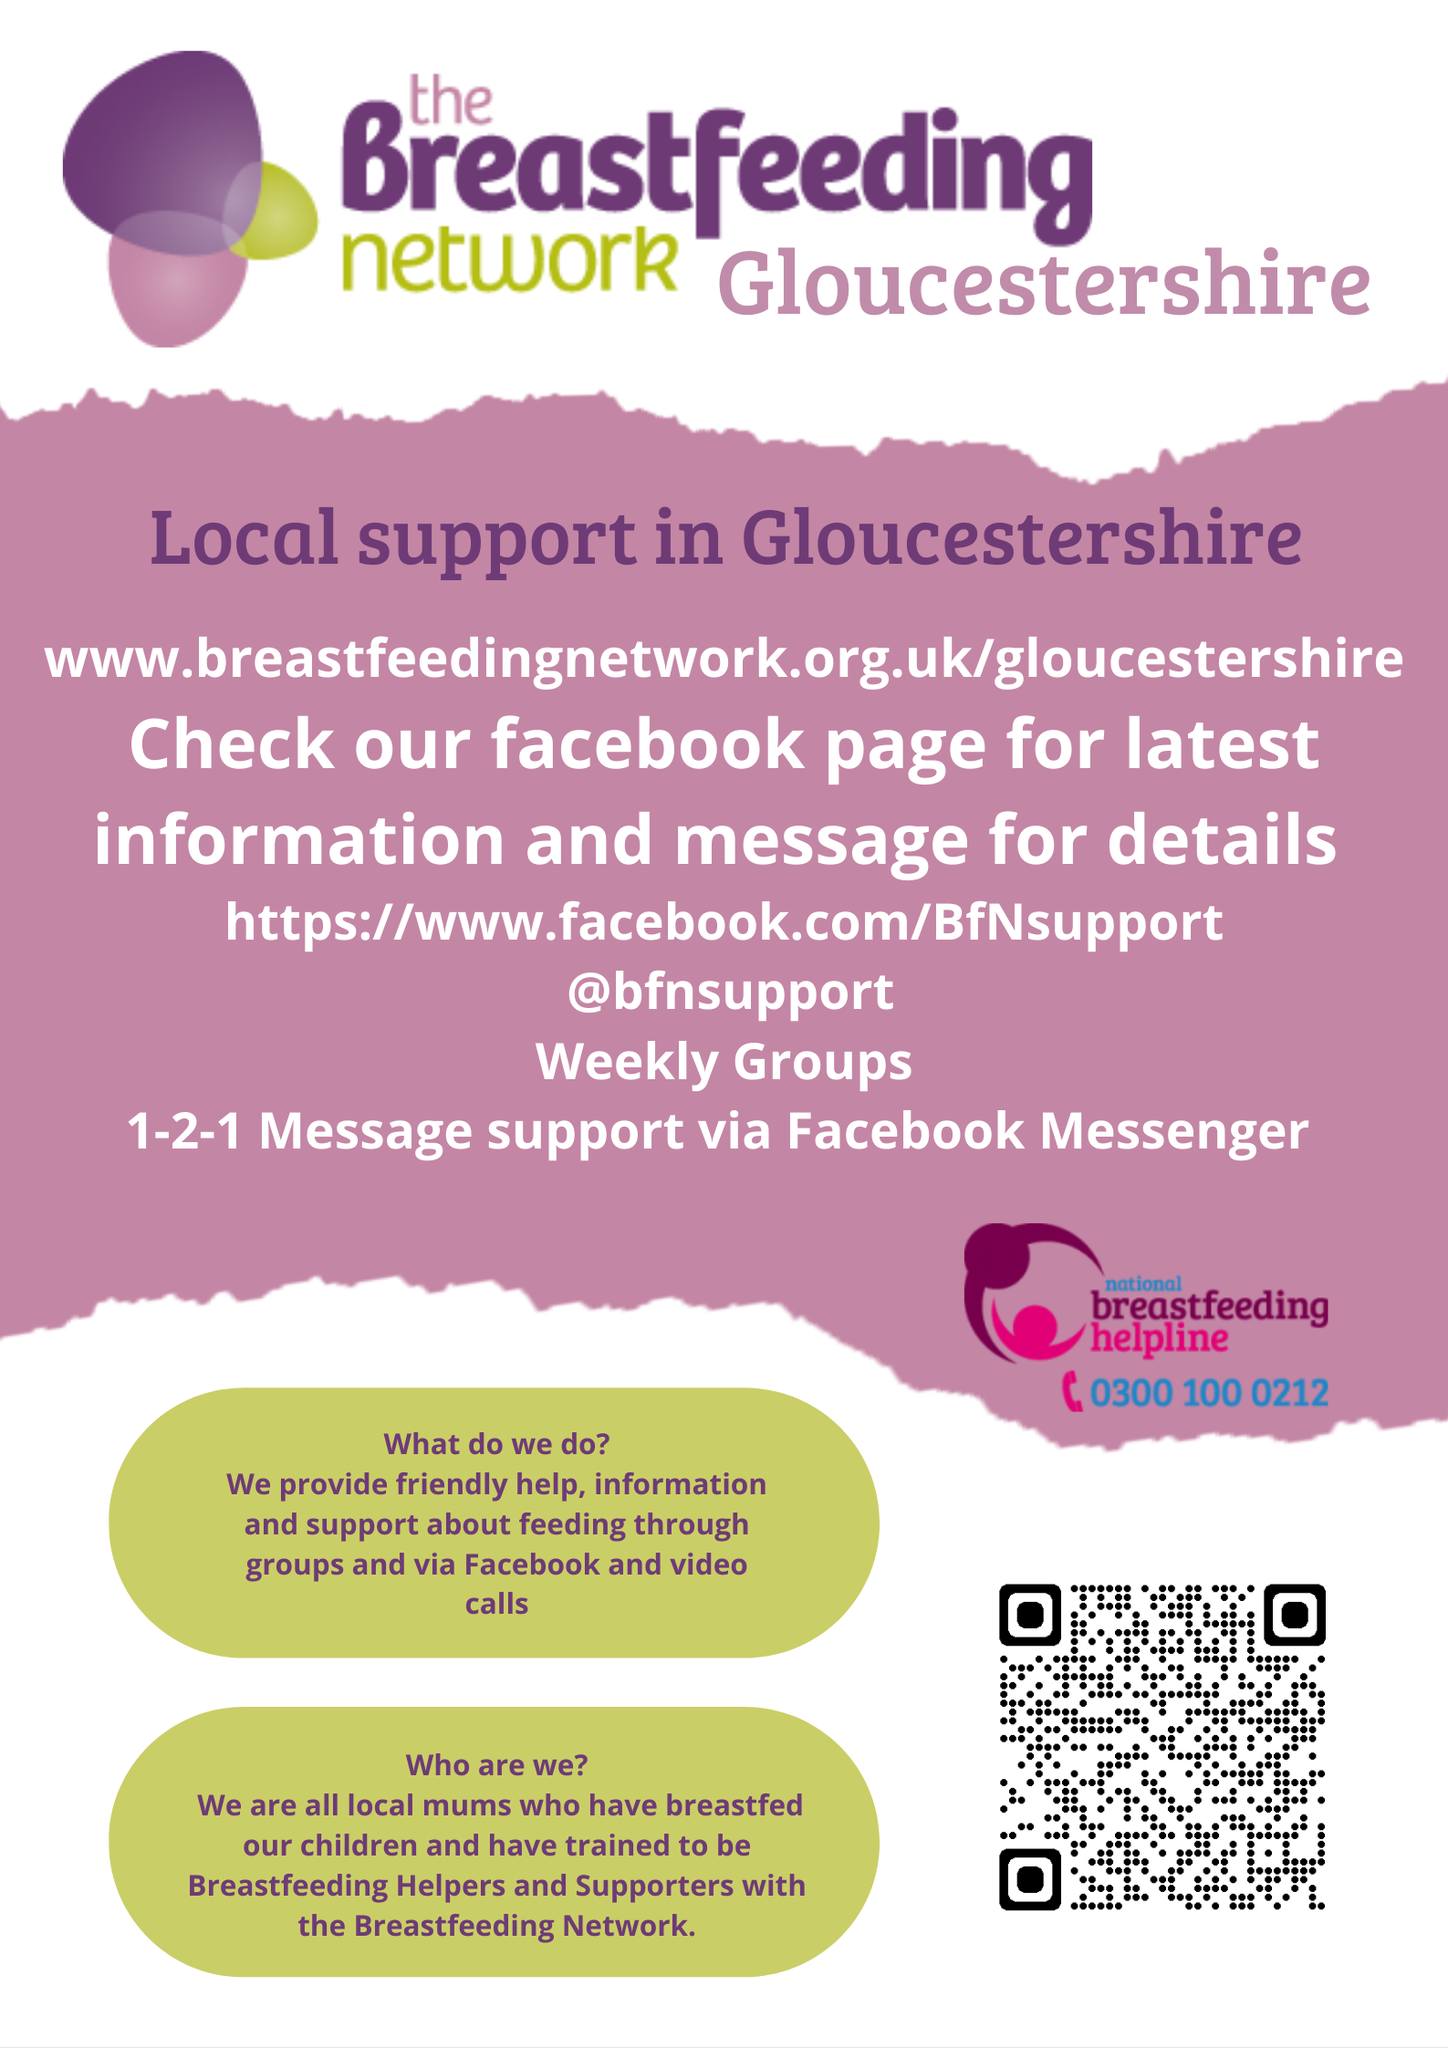 Local support in Gloucestershire
www.breastfeedingnetwork.org.uk/gloucestershire
Check out or facebook page for latest information and message for details
www.facebook.com/BfNsupport
@bfnsupport
Weekly Groups
1-2-1 Message support via Facebook Messenger
What do we do? We provide friendly help, information and support about feeding through groups and via Facebook and video calls.
Who are we?
We are all local mums who have breastfed our children and have trained to be Breastfeeding Helpers and Supporters with the Breastfeeding Network.